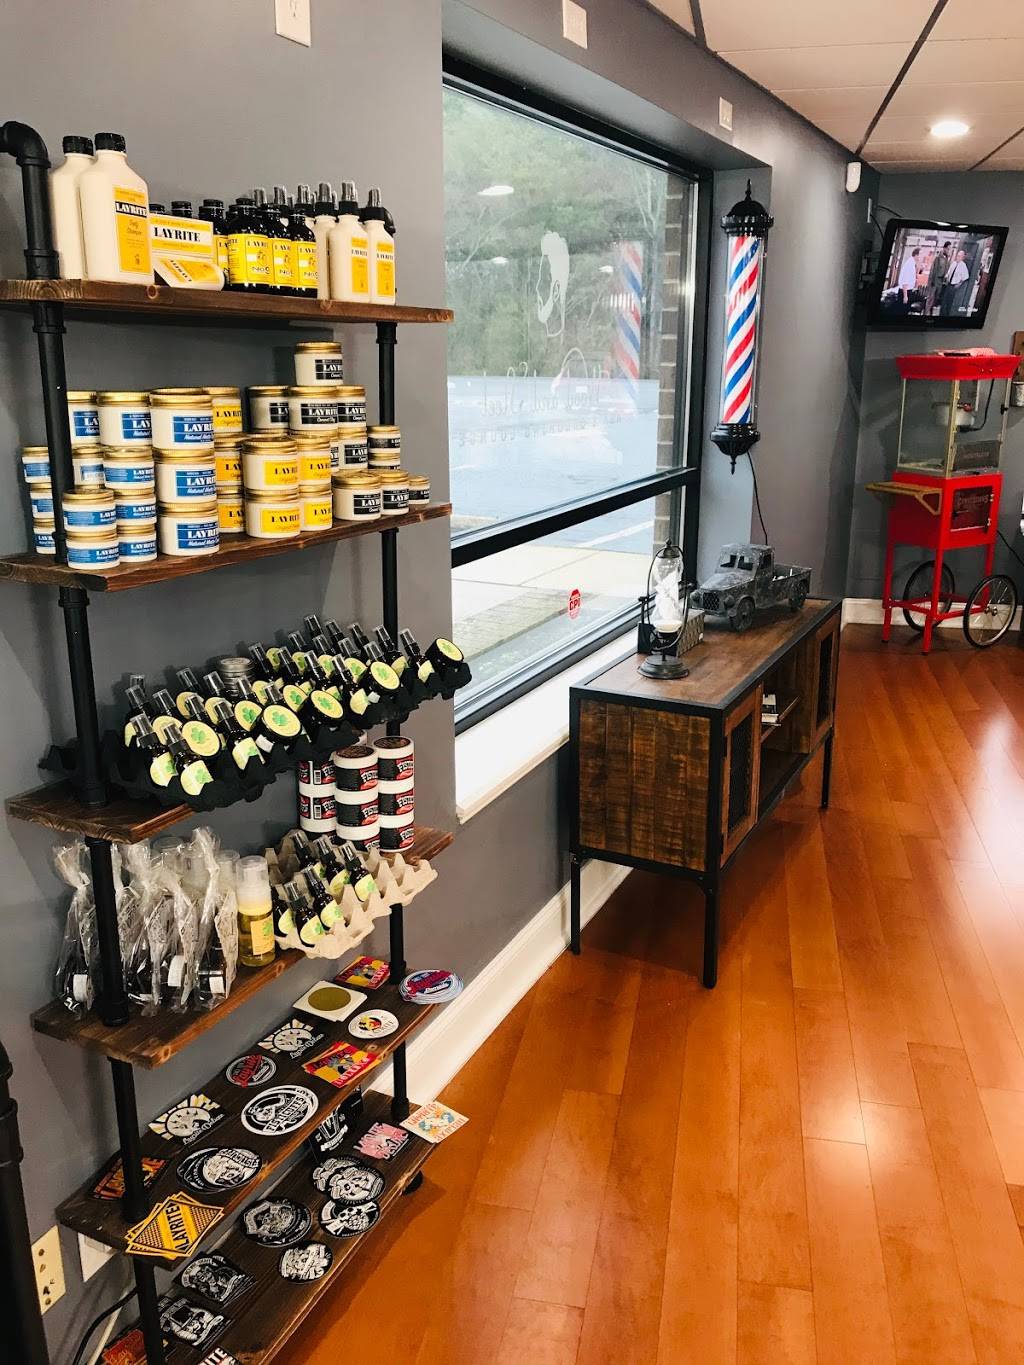 Wood and Steel Mens Grooming Lounge | 4434 N Center St, Hickory, NC 28601 | Phone: (828) 855-0475